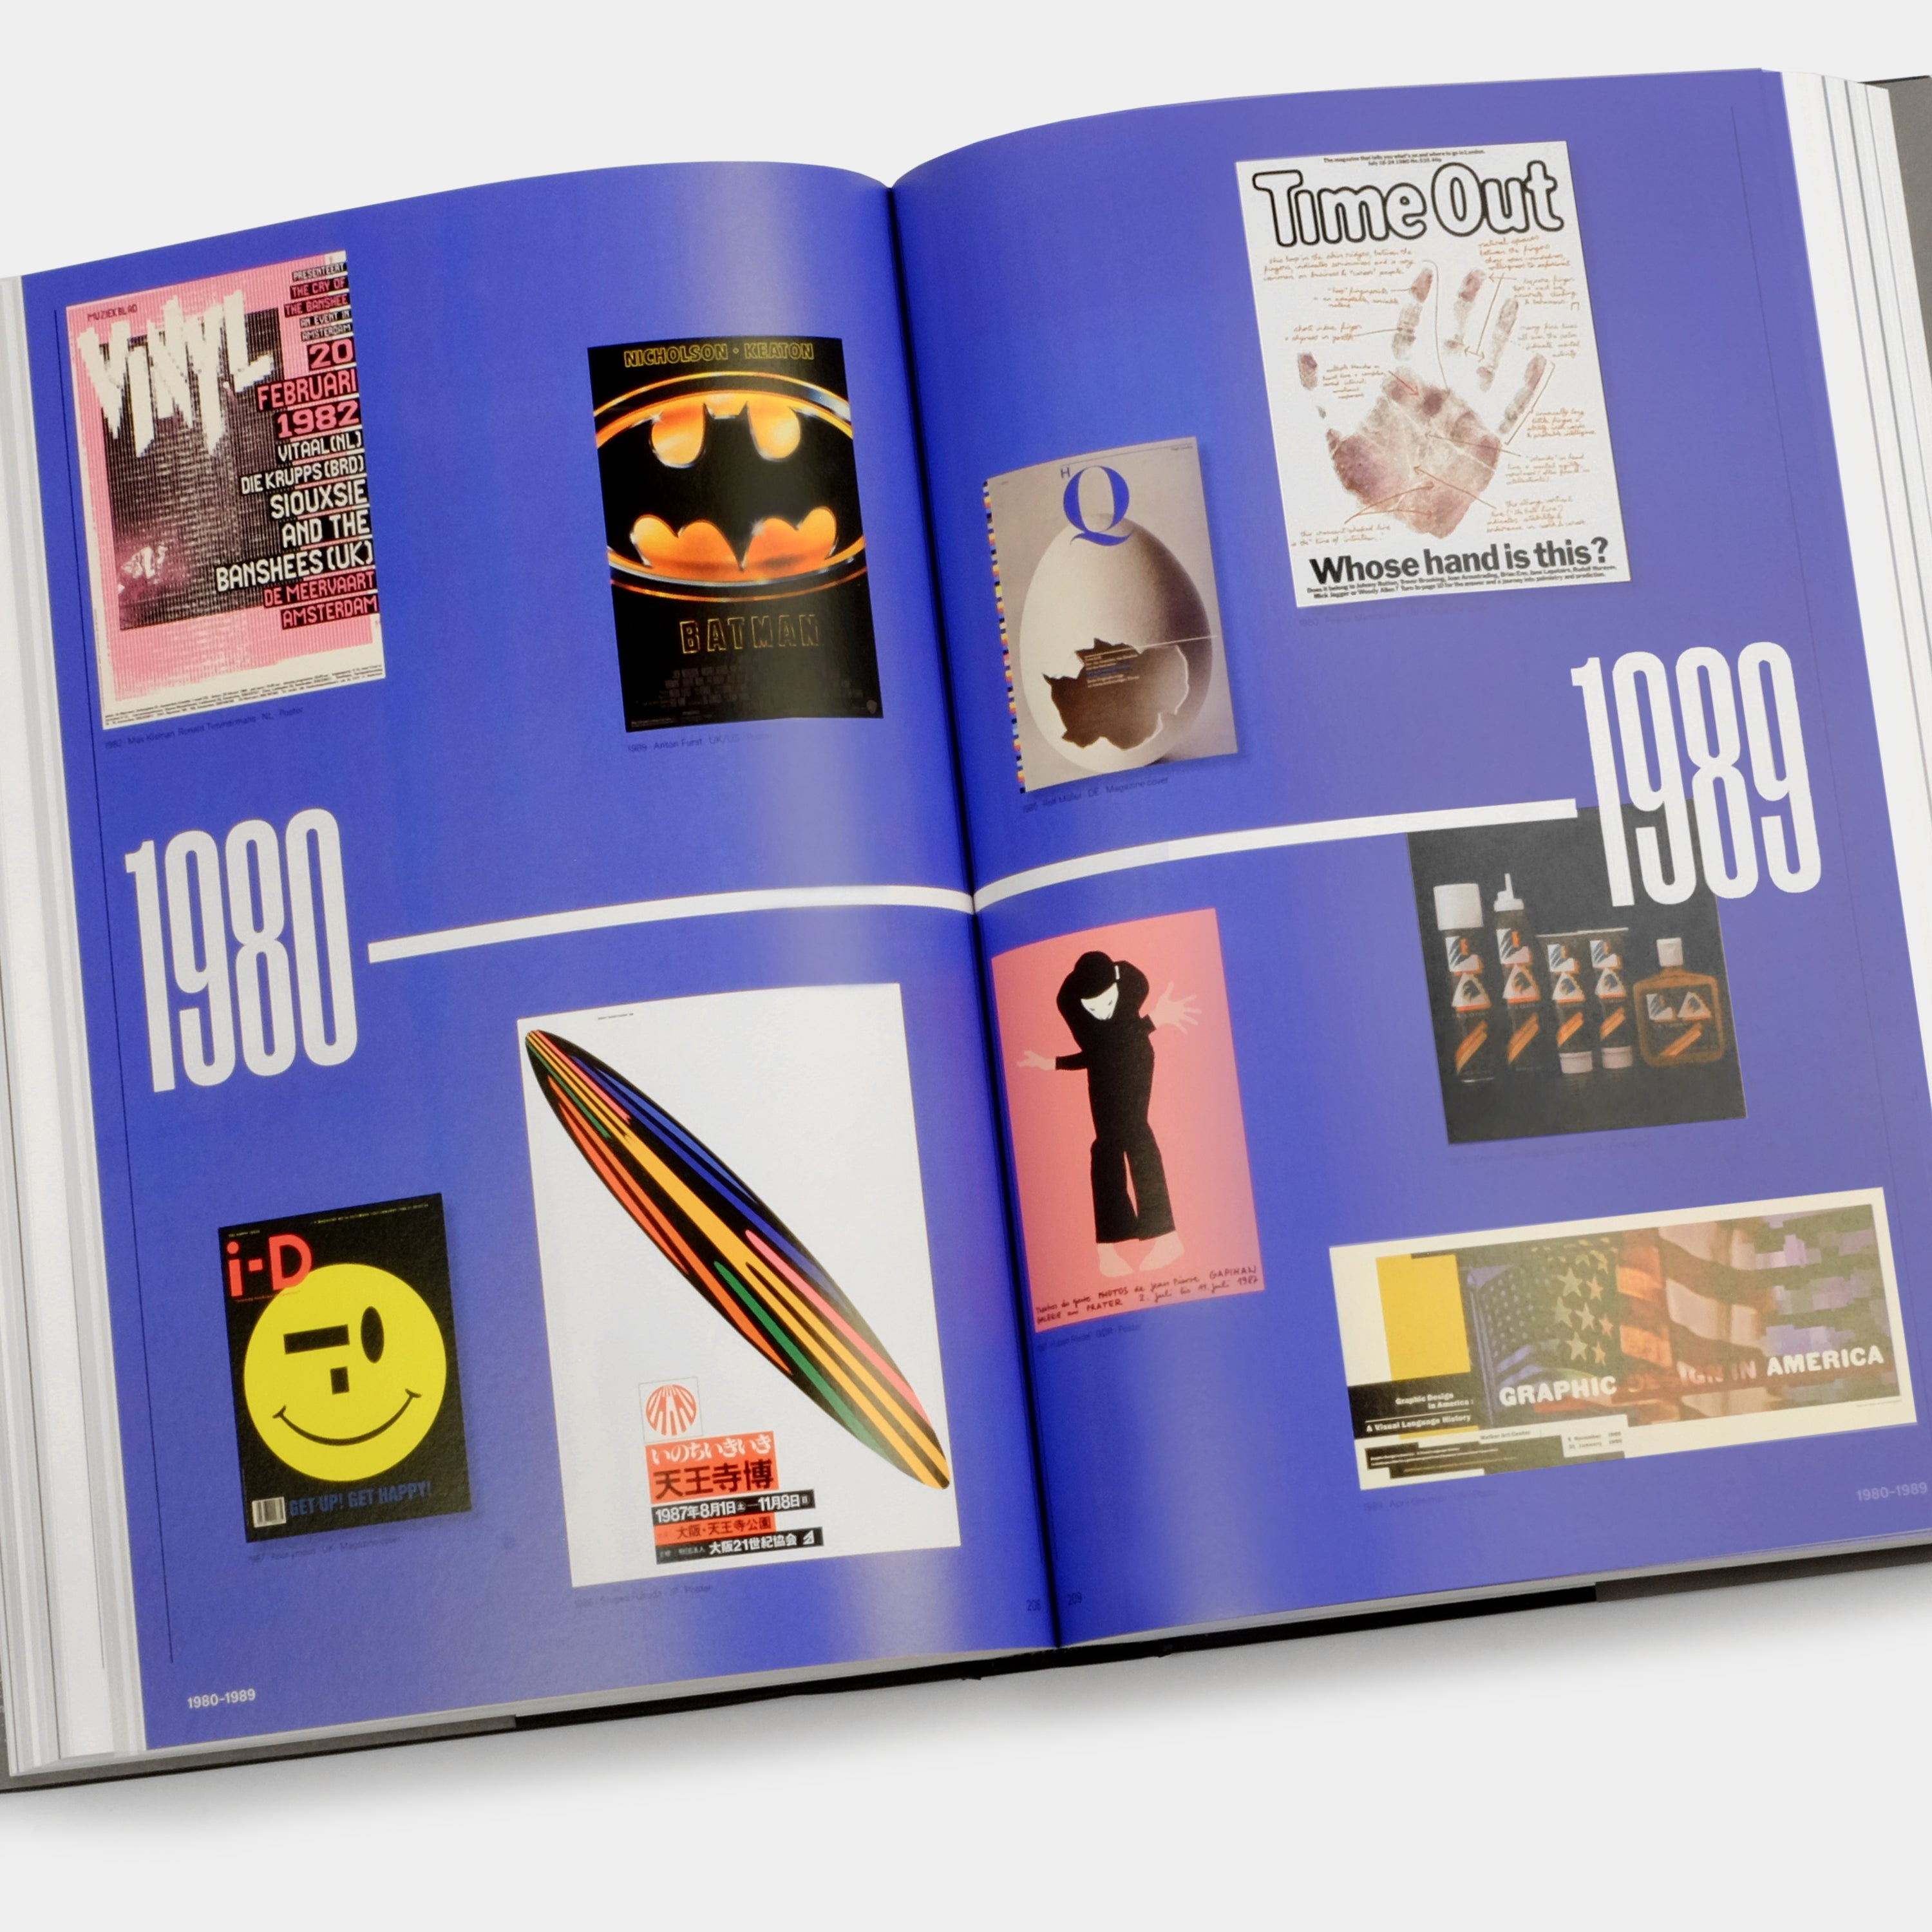 The History of Graphic Design: Vol. 2. (1960-Today) by Jens Müller XL Taschen Book